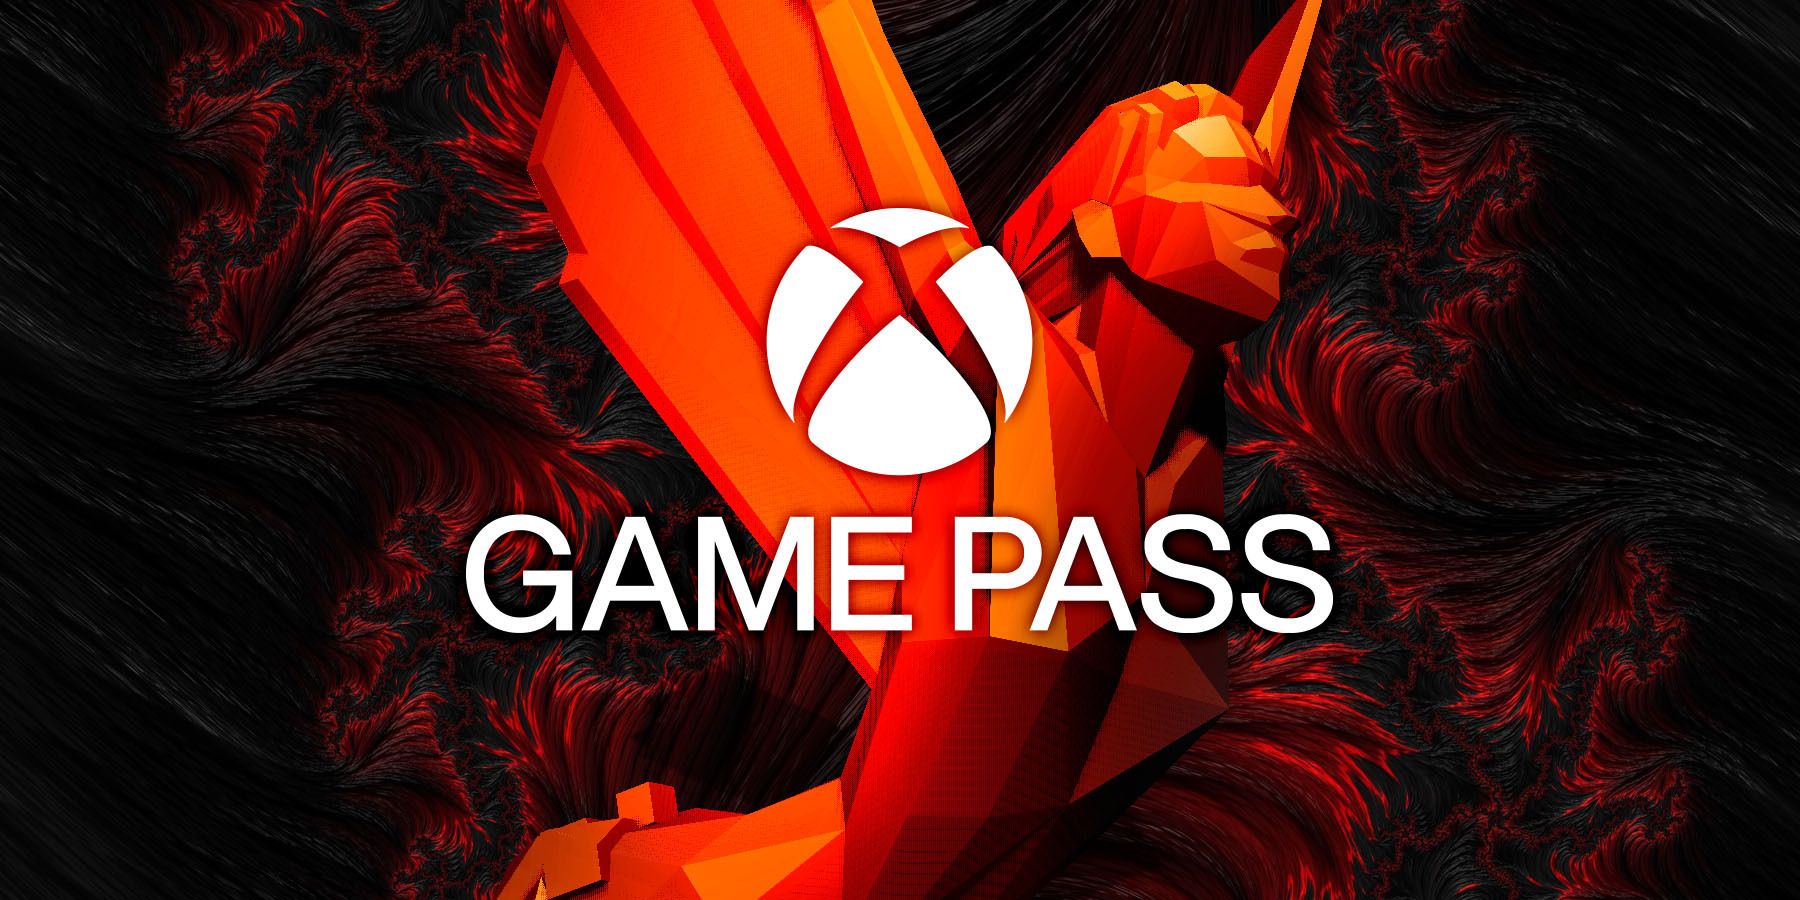 Xbox Game Pass Twitter Presence - The Shorty Awards